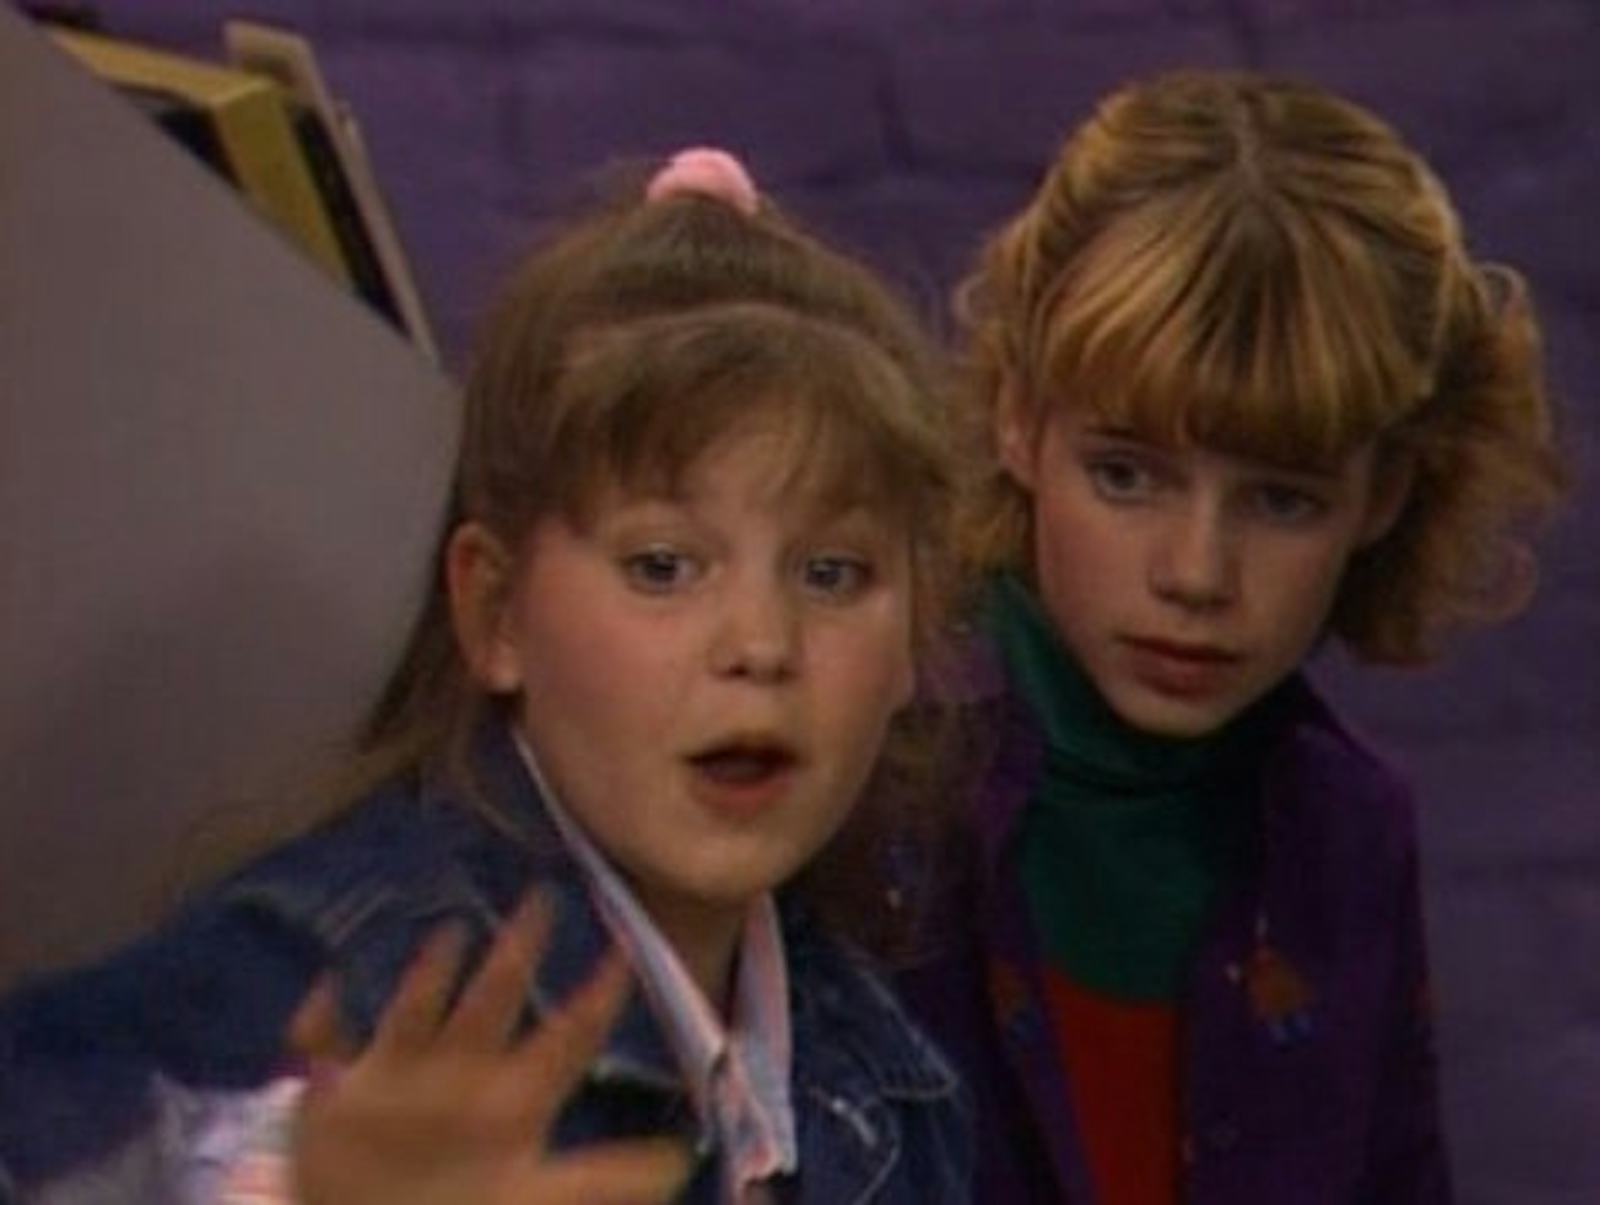 The One D J Centric Full House Episode That No One Appreciates Enough